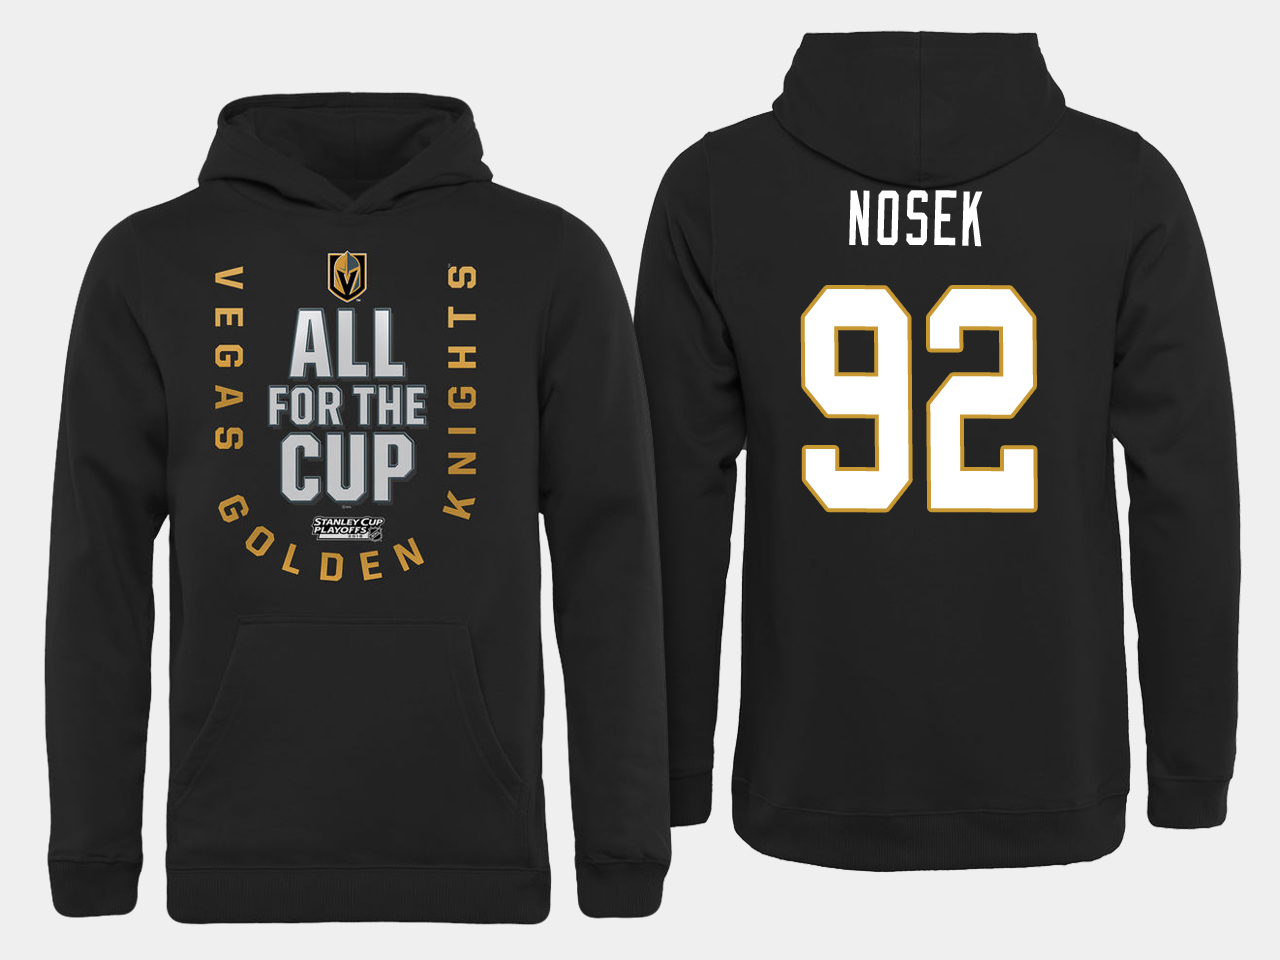 Men NHL Vegas Golden Knights #92 Nosek All for the Cup hoodie->more nhl jerseys->NHL Jersey